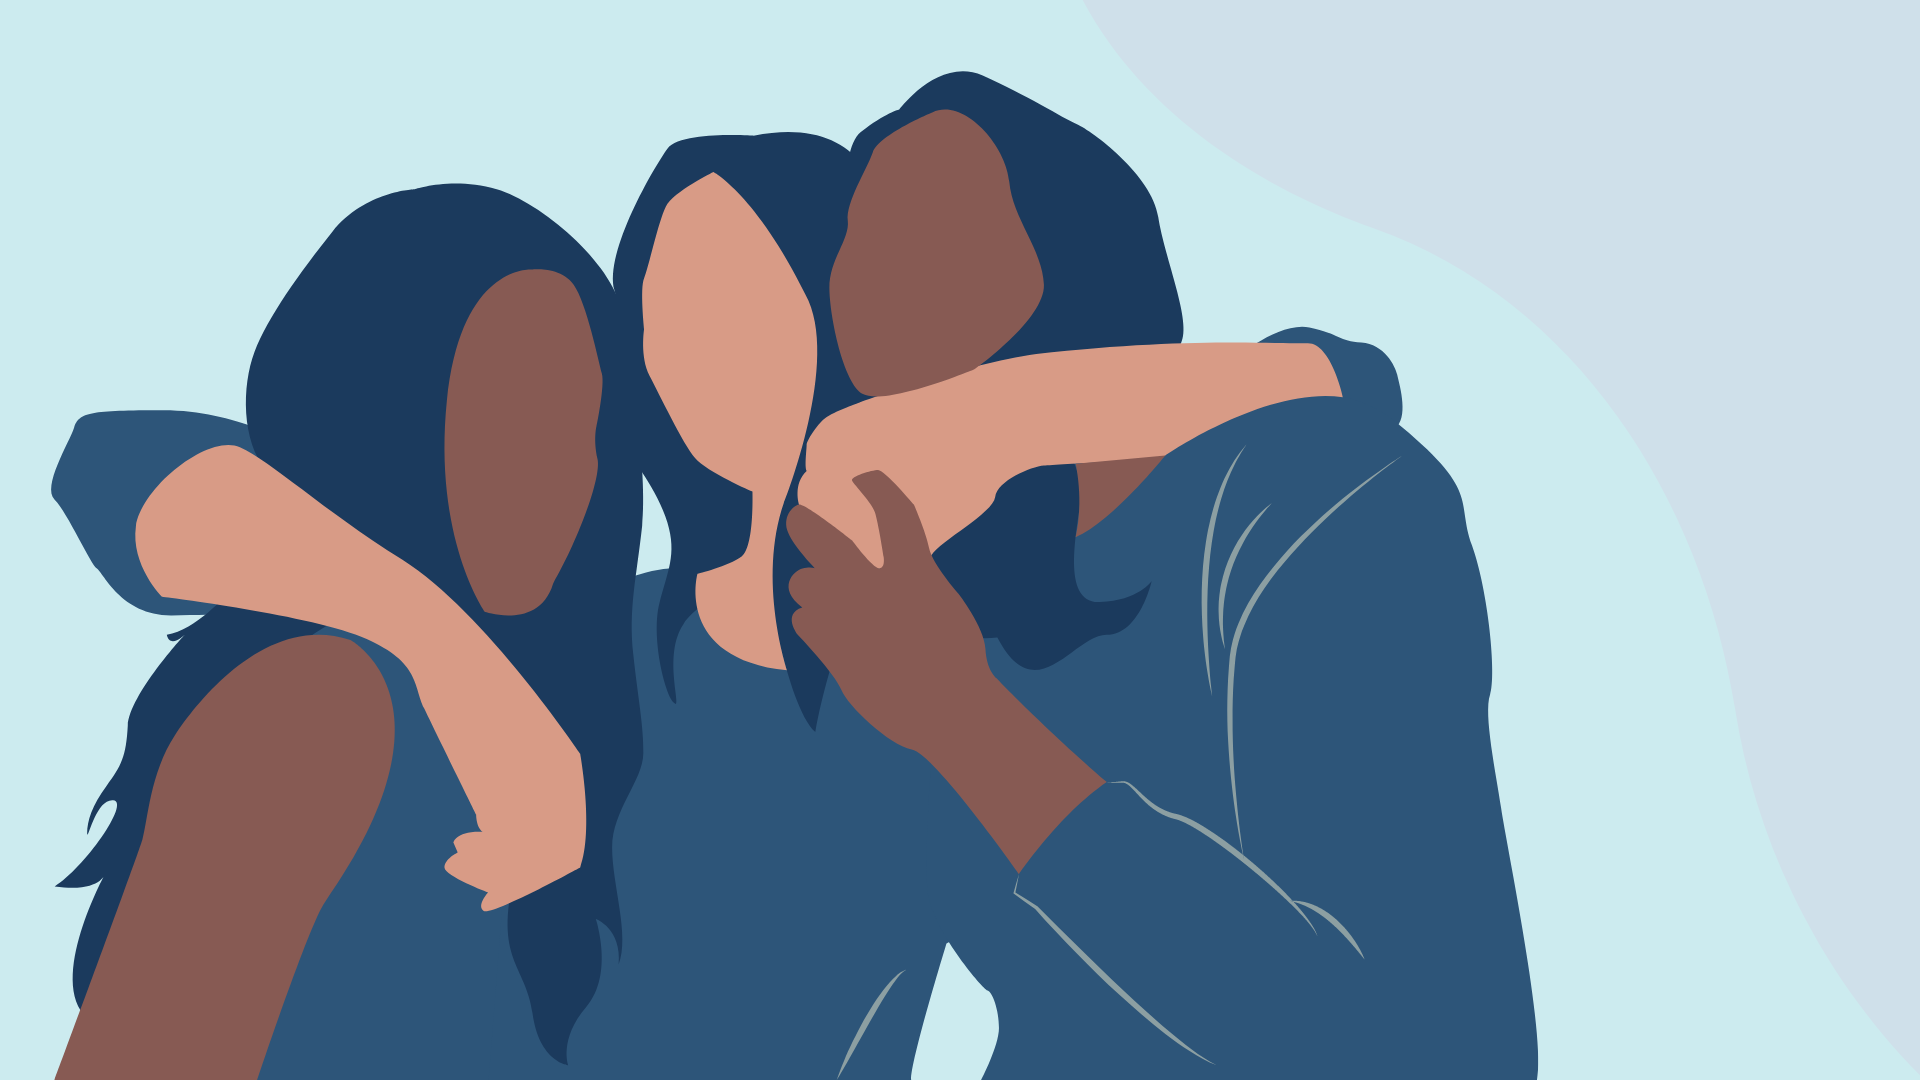 Illustration of three black women in an embrace